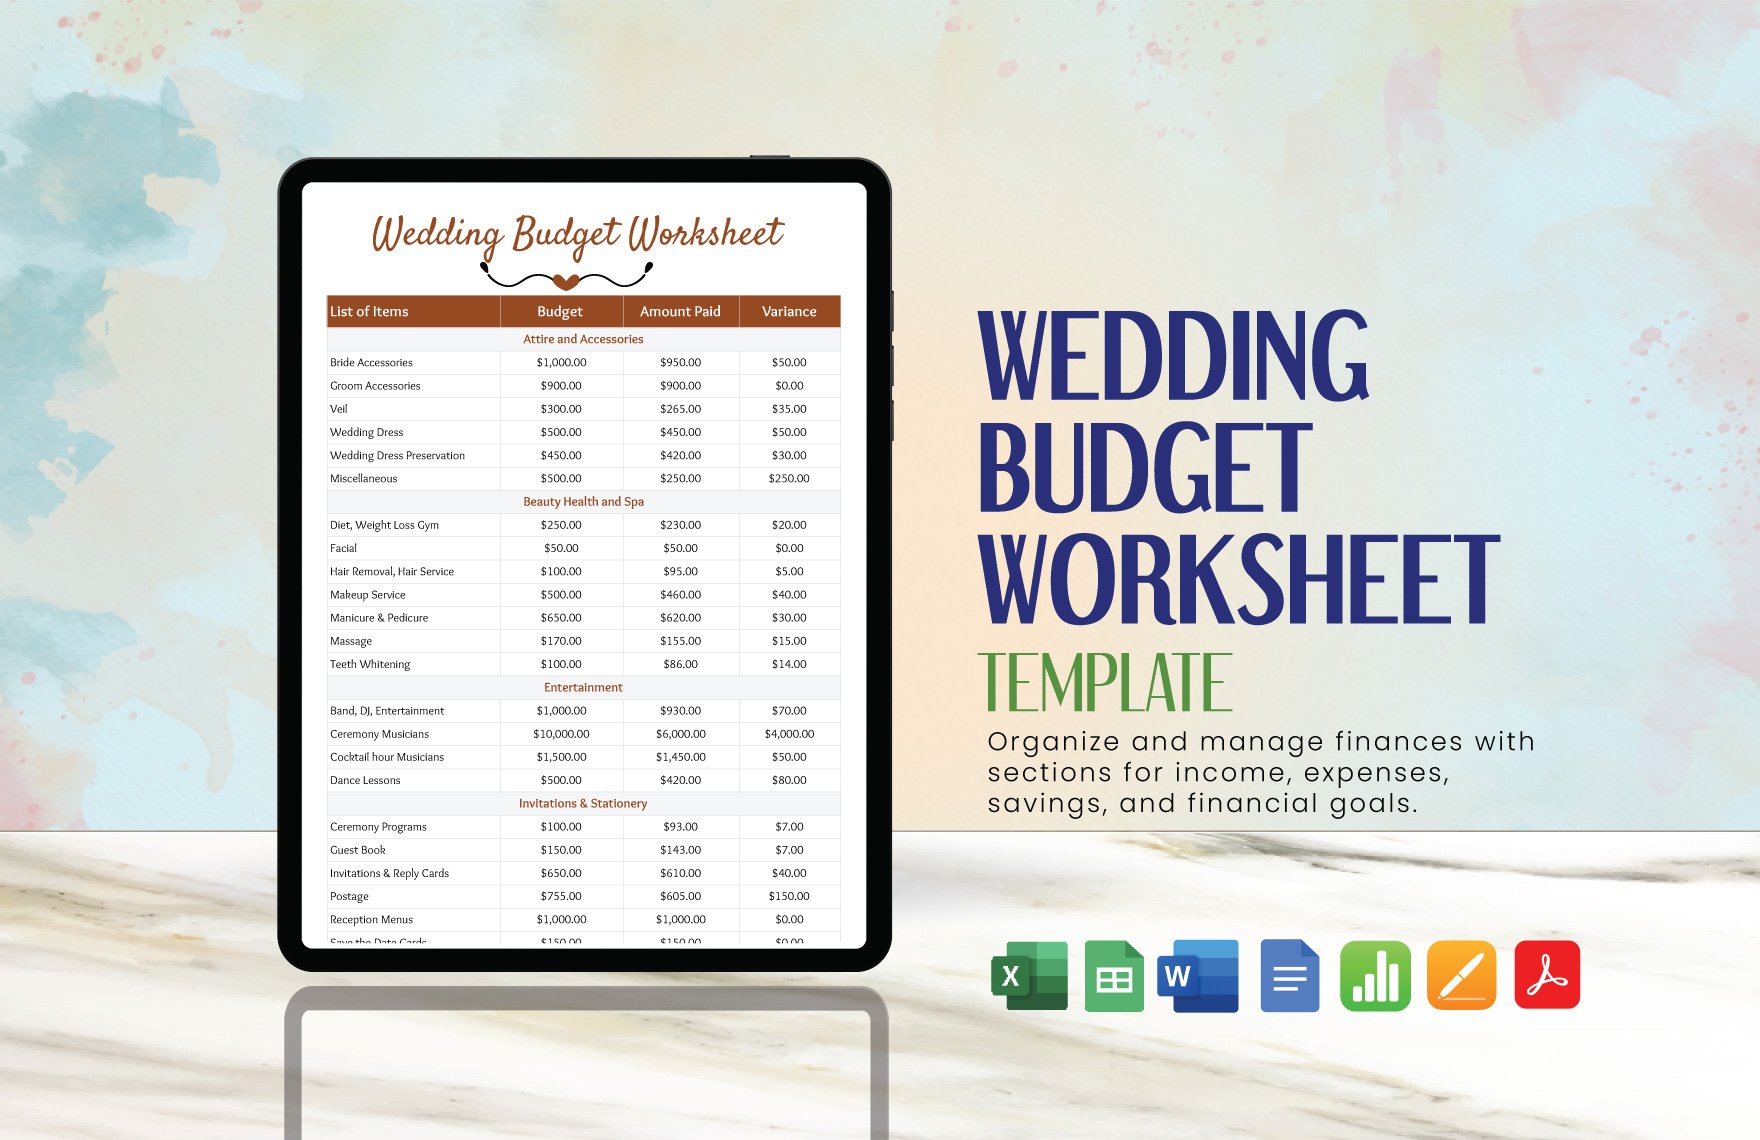 Wedding Budget Worksheet Template in Word, Google Docs, Excel, PDF, Google Sheets, Apple Pages, Apple Numbers